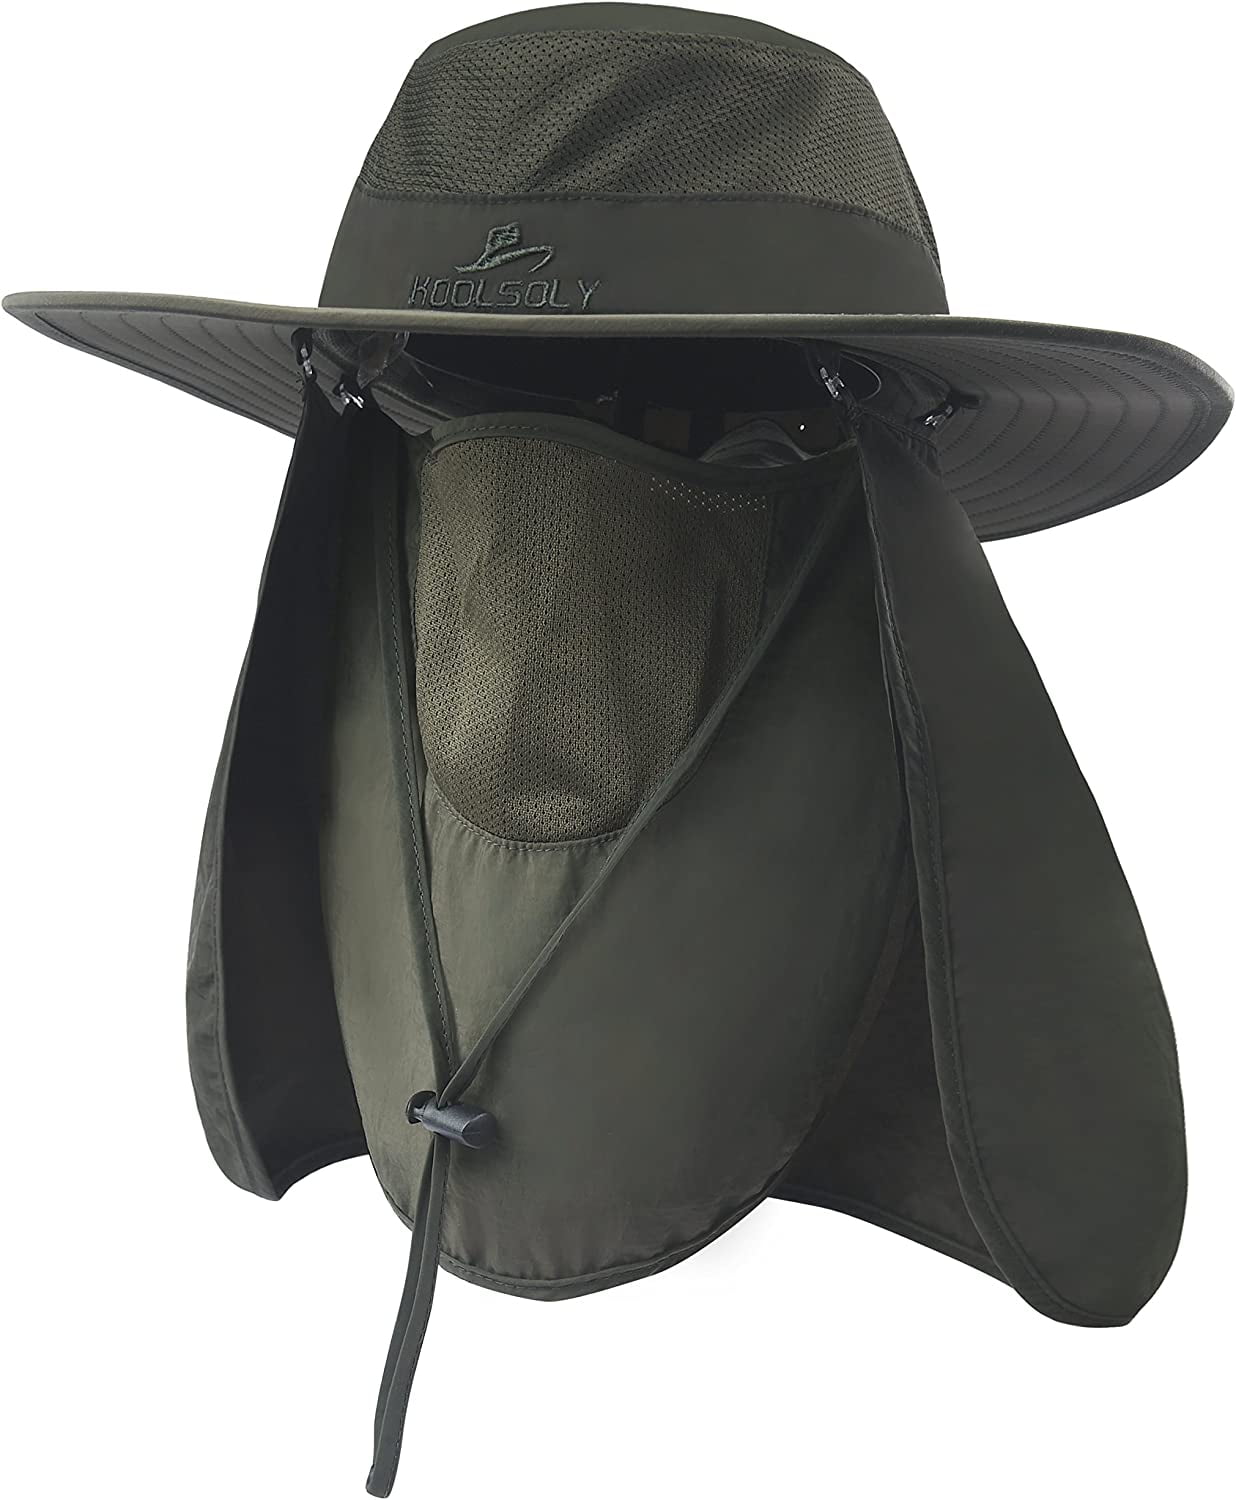 KOOLSOLY Fishing Hat,Sun Cap with UPF 50+ Sun Protection and Neck